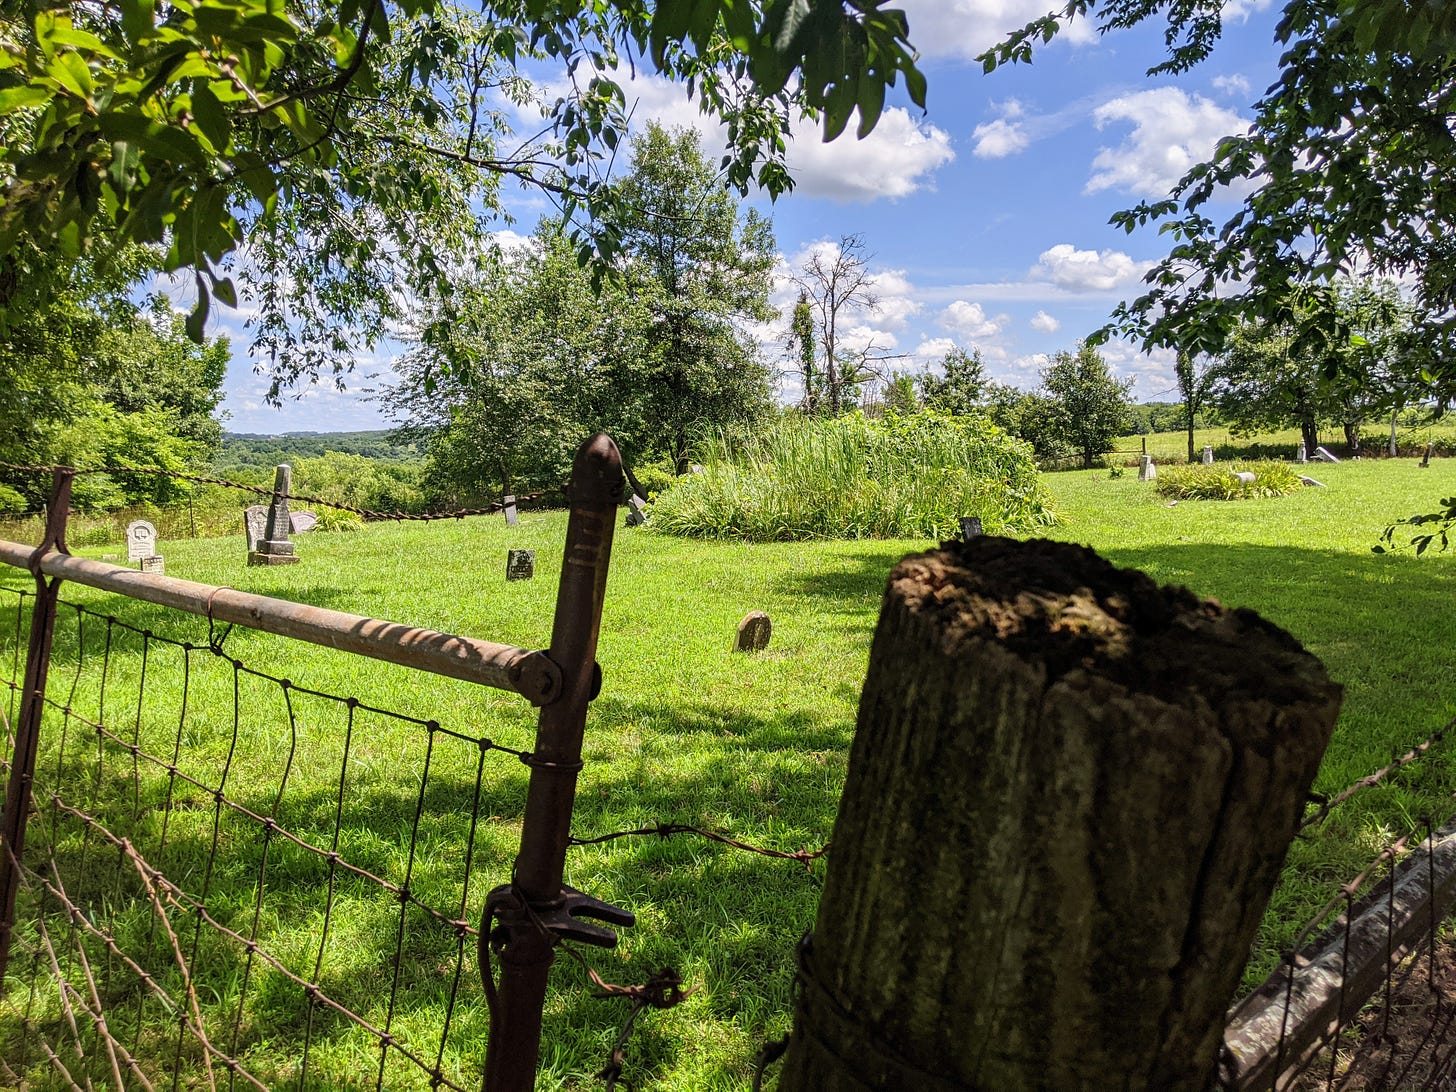 Old cemetery in summer, with a few leaning gravestones, a barbed wire fence, and trees and fields in the distance.